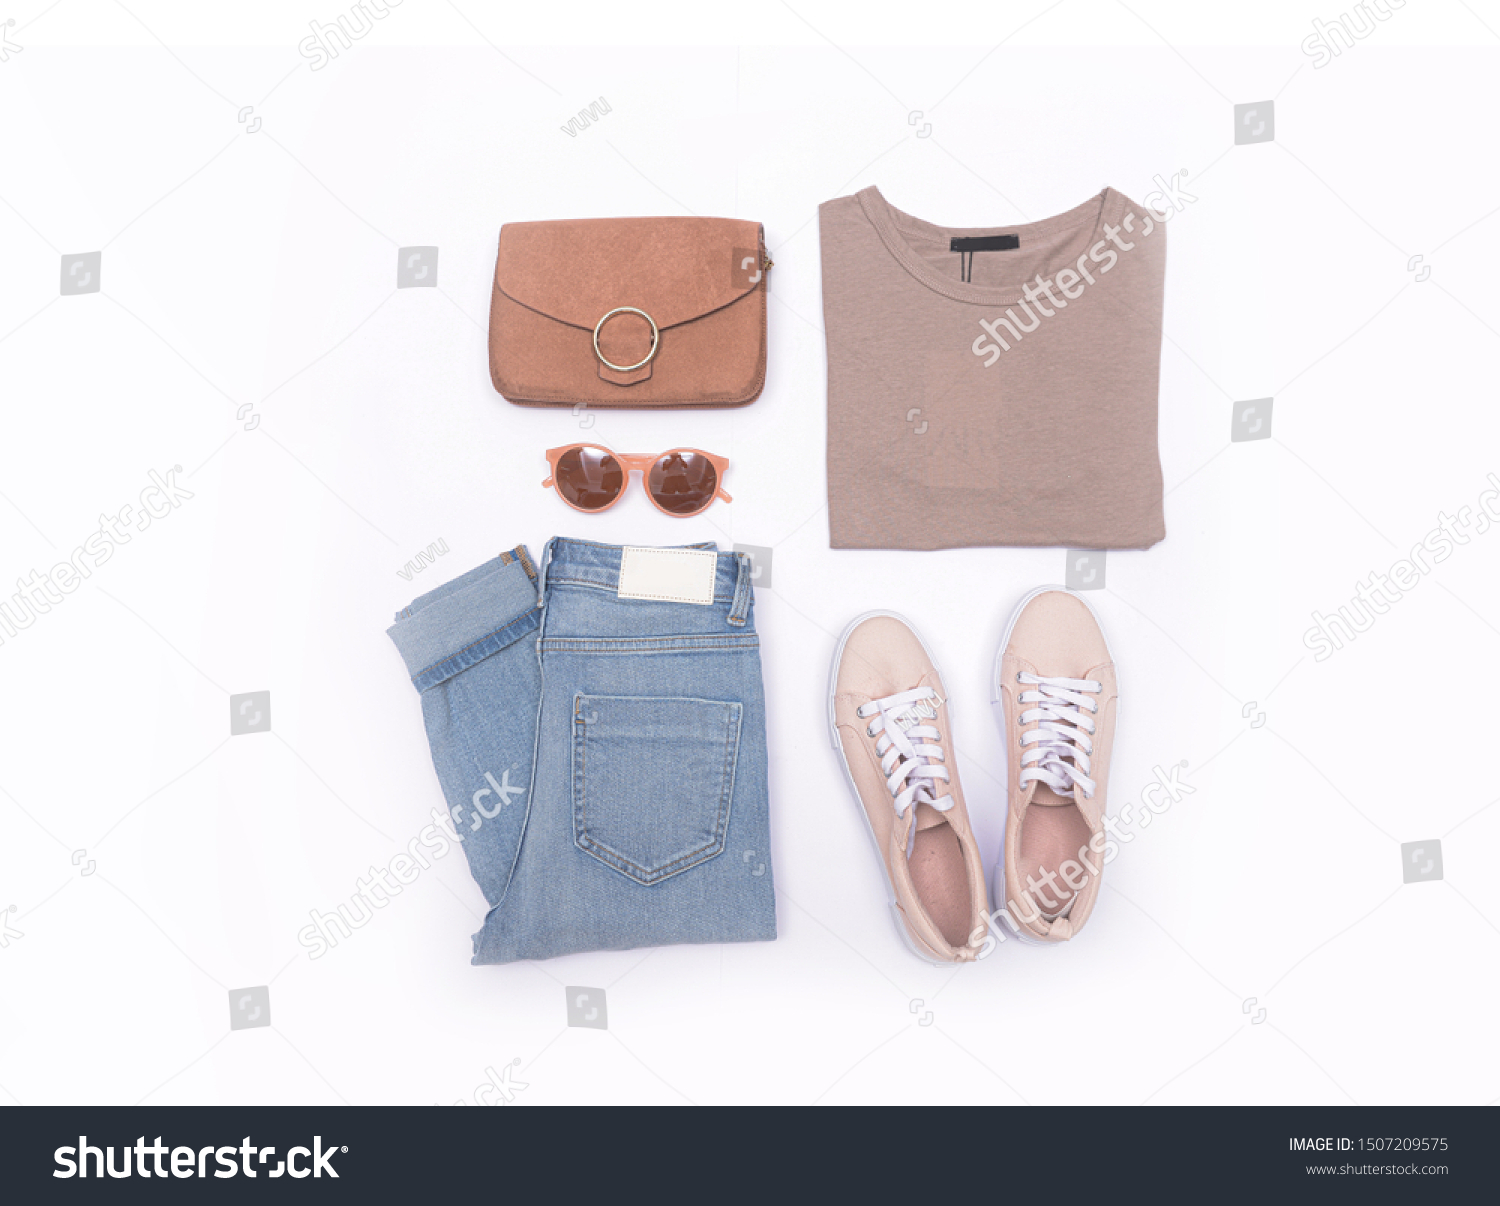 Flat Lay Clothes Accessories On White Stock Photo 1507209575 | Shutterstock